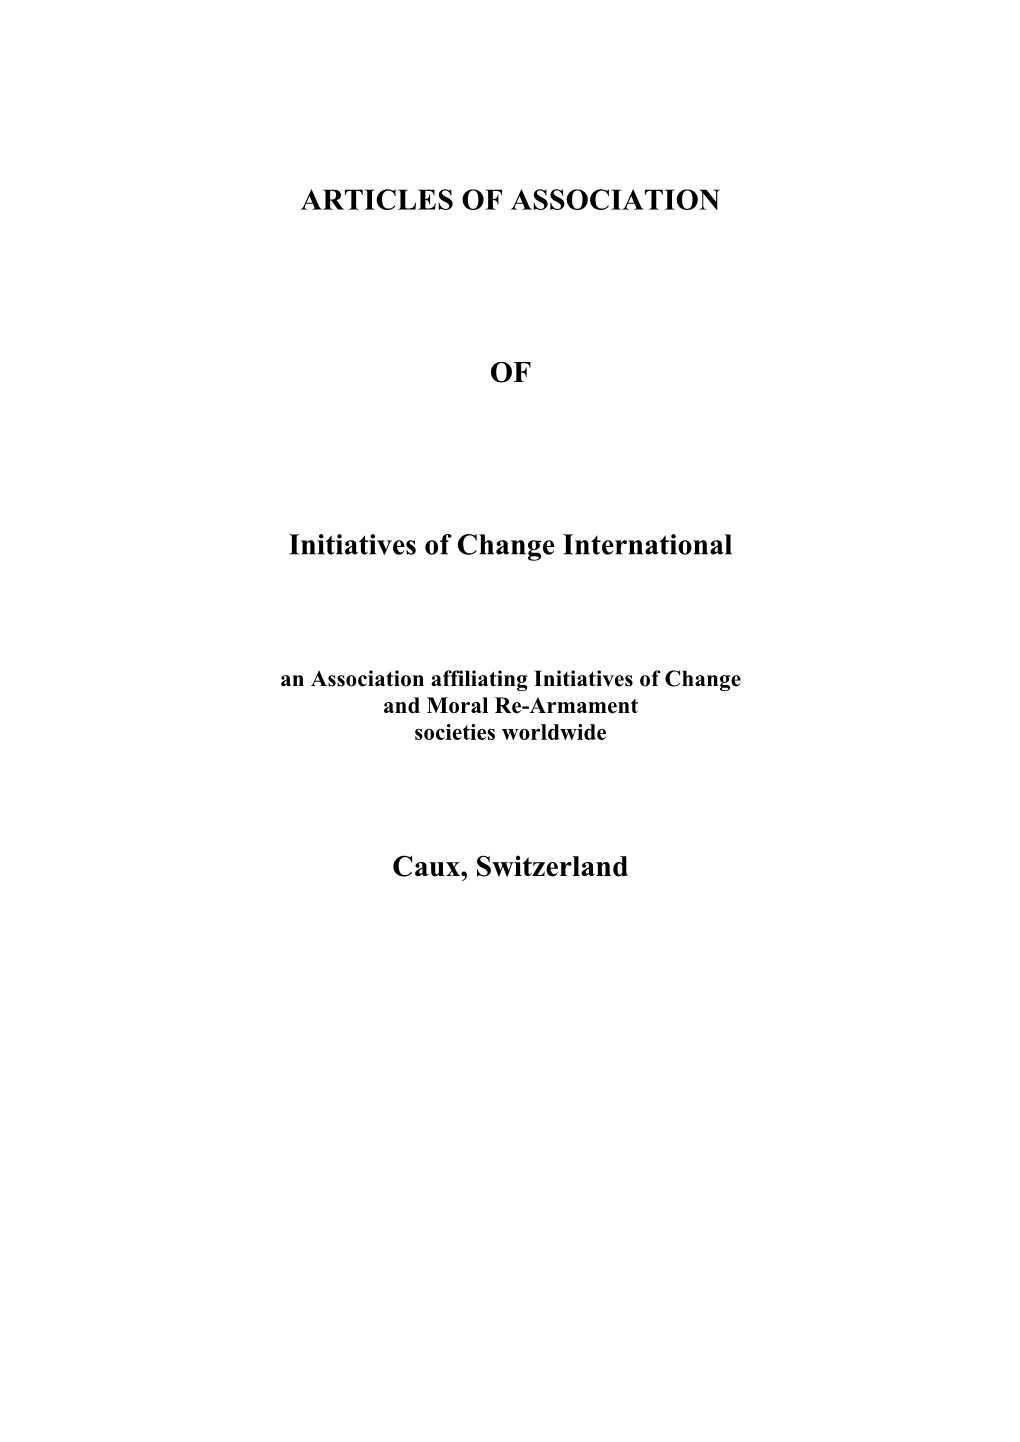 ARTICLES of ASSOCIATION of Initiatives of Change International